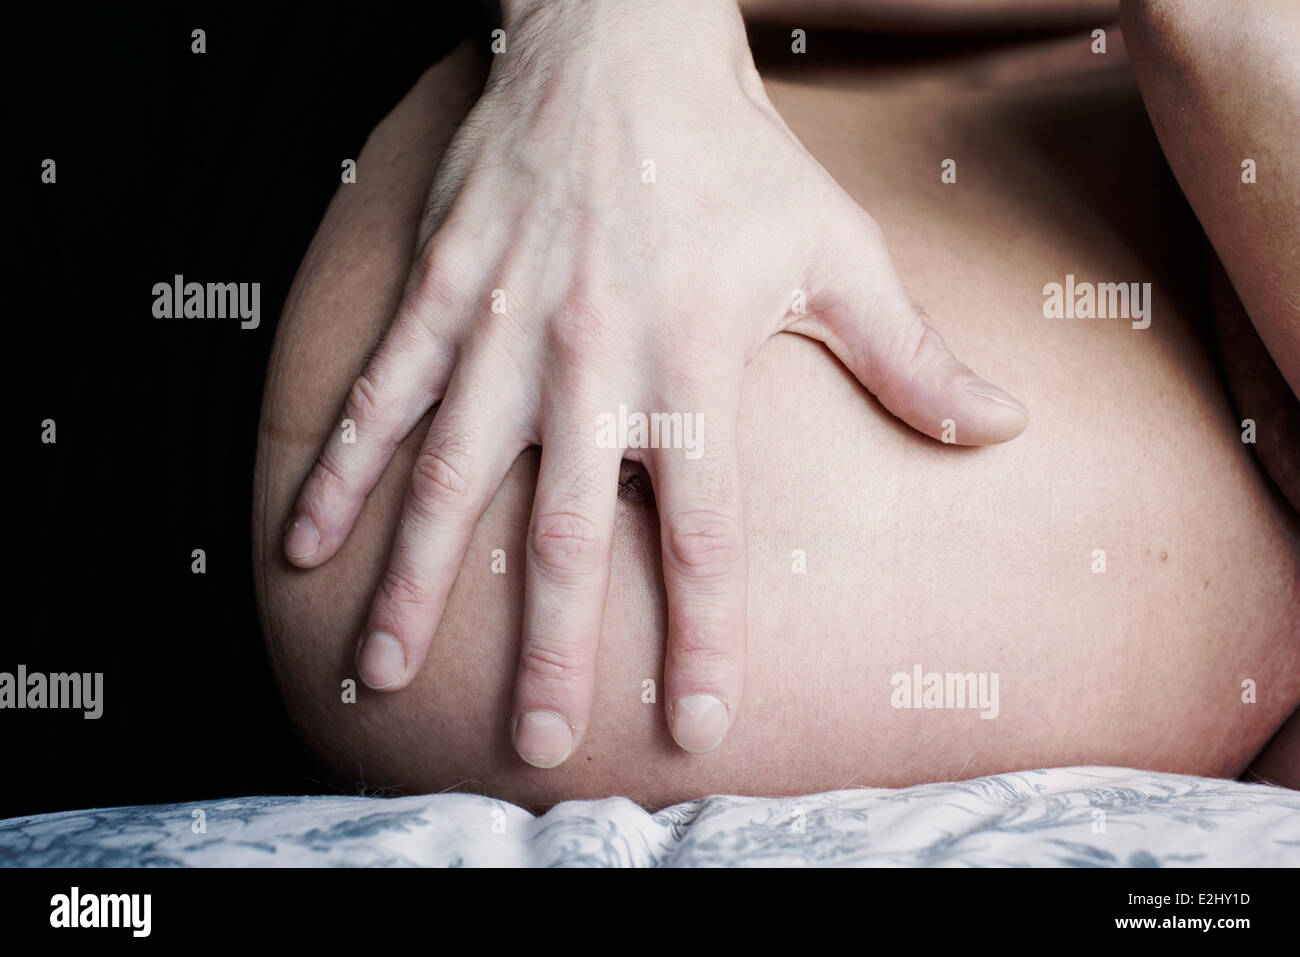 Woman's hand on pregnant stomach, close-up Stock Photo